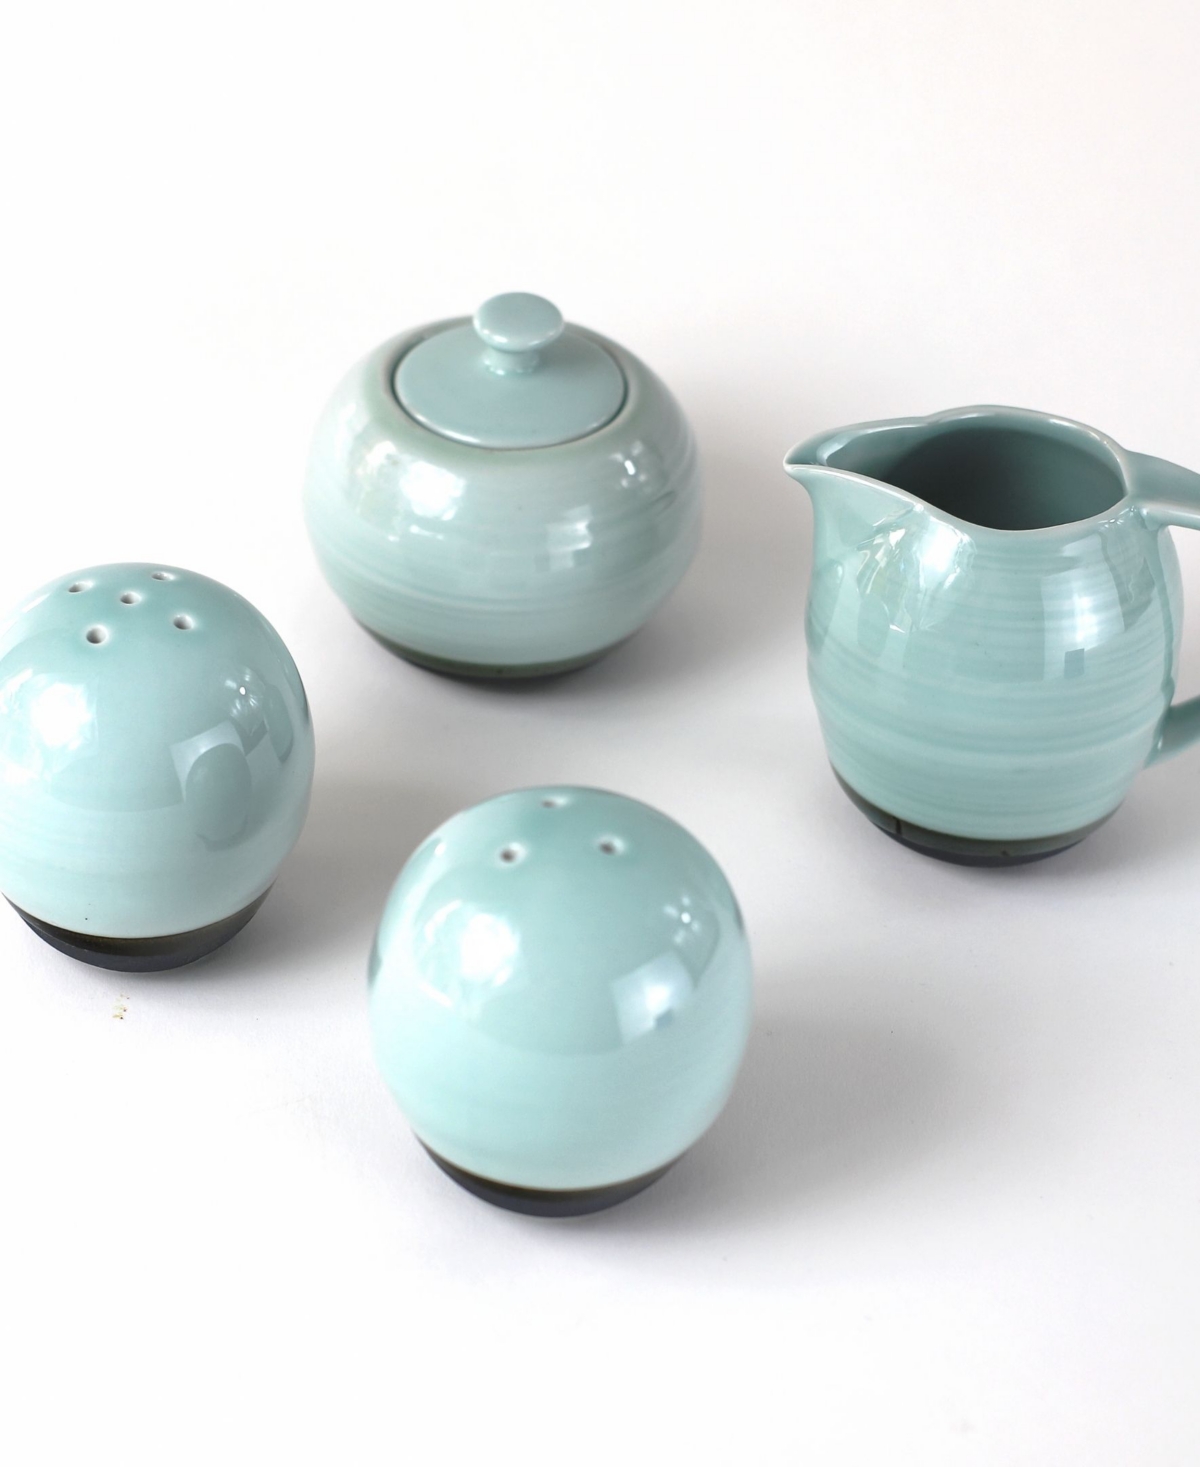 Euro Ceramica Diana Breakfast And Table Accessory Set, 4 Piece In Turquoise/gray